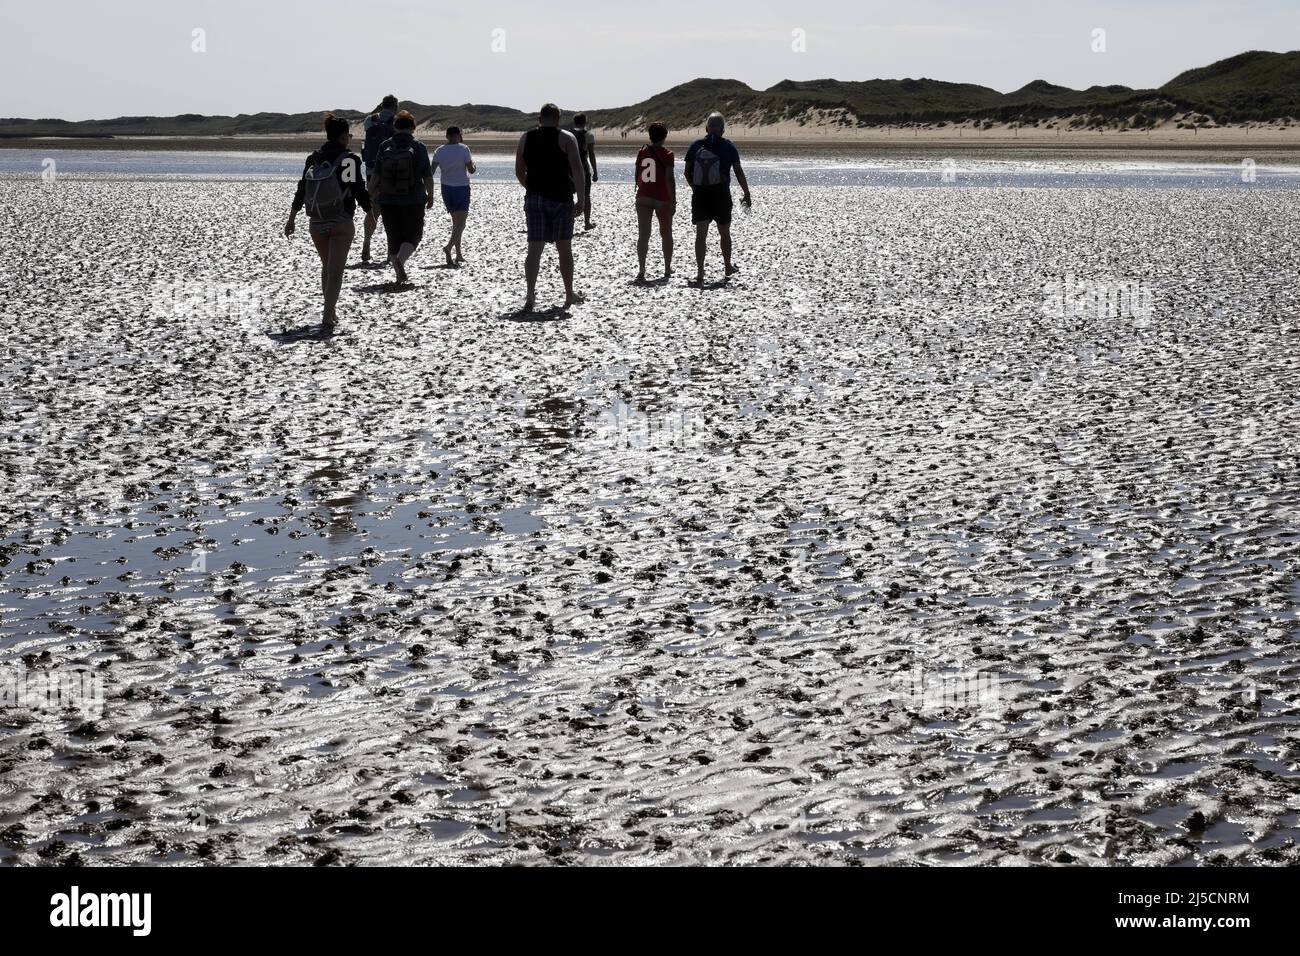 Norddorf, DEU, 16.06.2020 - Mudflat walk on the island of Amrum. In Schleswig-Holstein, numerous relaxations in the corona crisis have come into force. After the end of the lockdown, vacationers are allowed to travel to the North Frisian islands again. [automated translation] Stock Photo